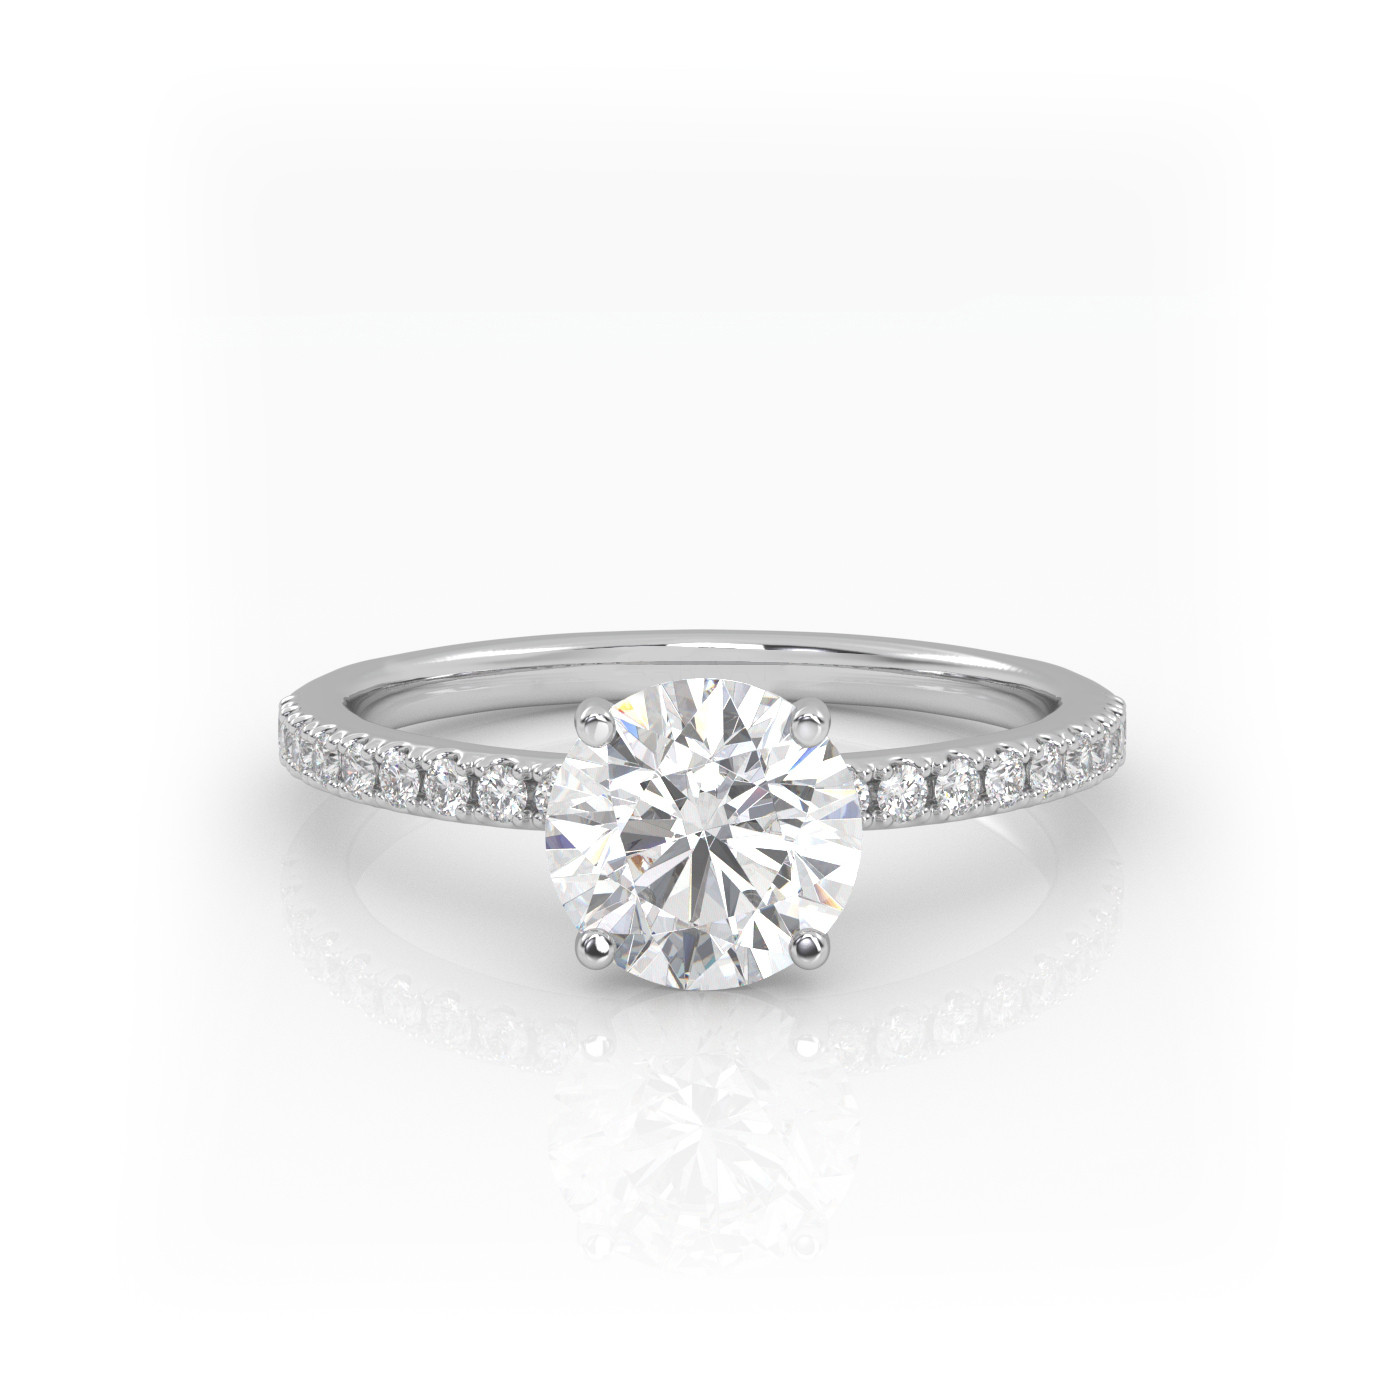 18K WHITE GOLD Round Diamond Cut Solitaire Engagement Ring with Pave Band